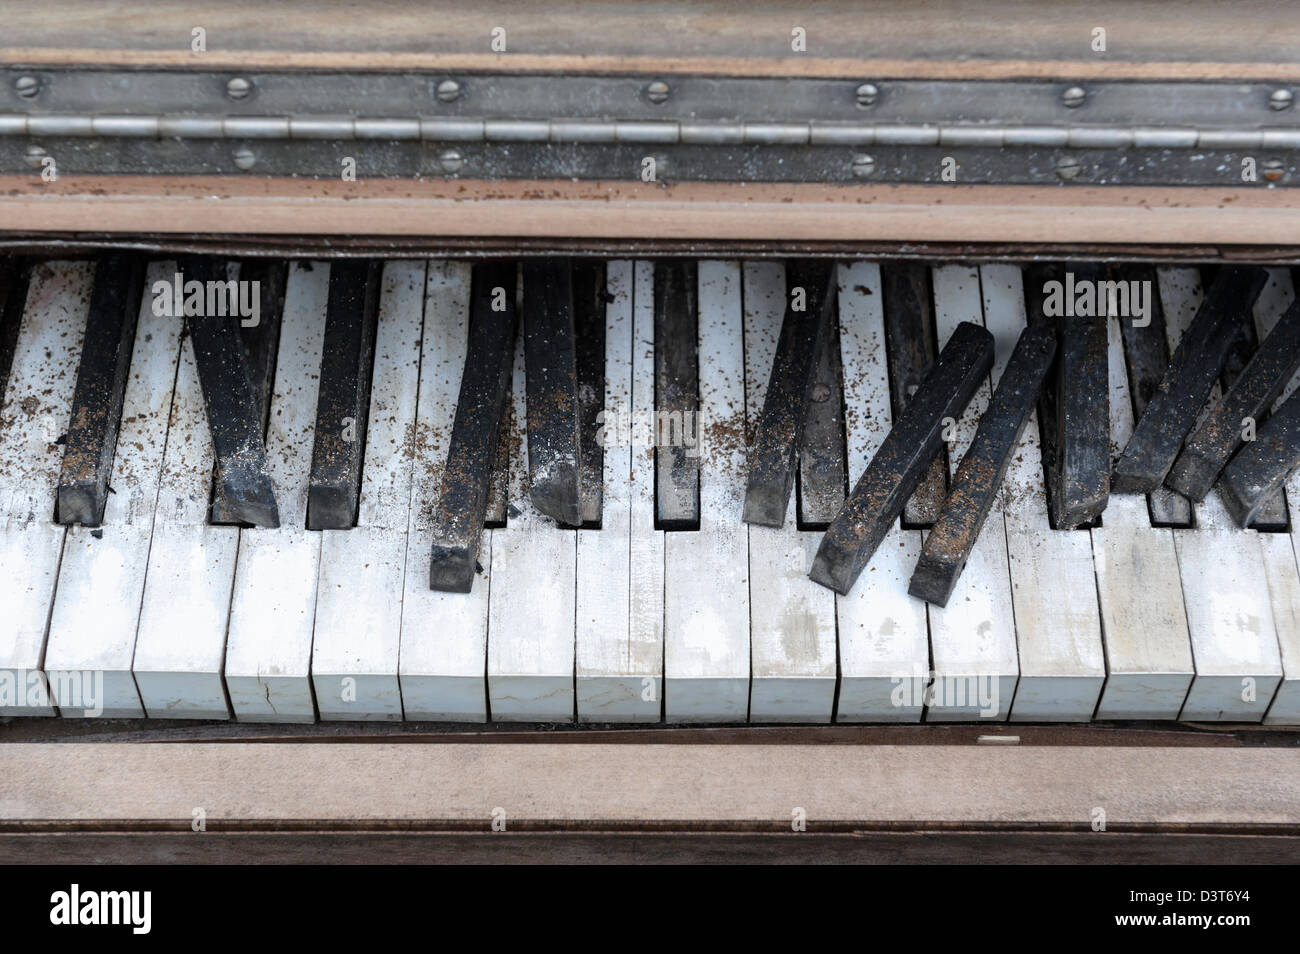 Piano keyboard close up sitting abandoned grunged and broken keyboard sitting outside in the weather. Stock Photo